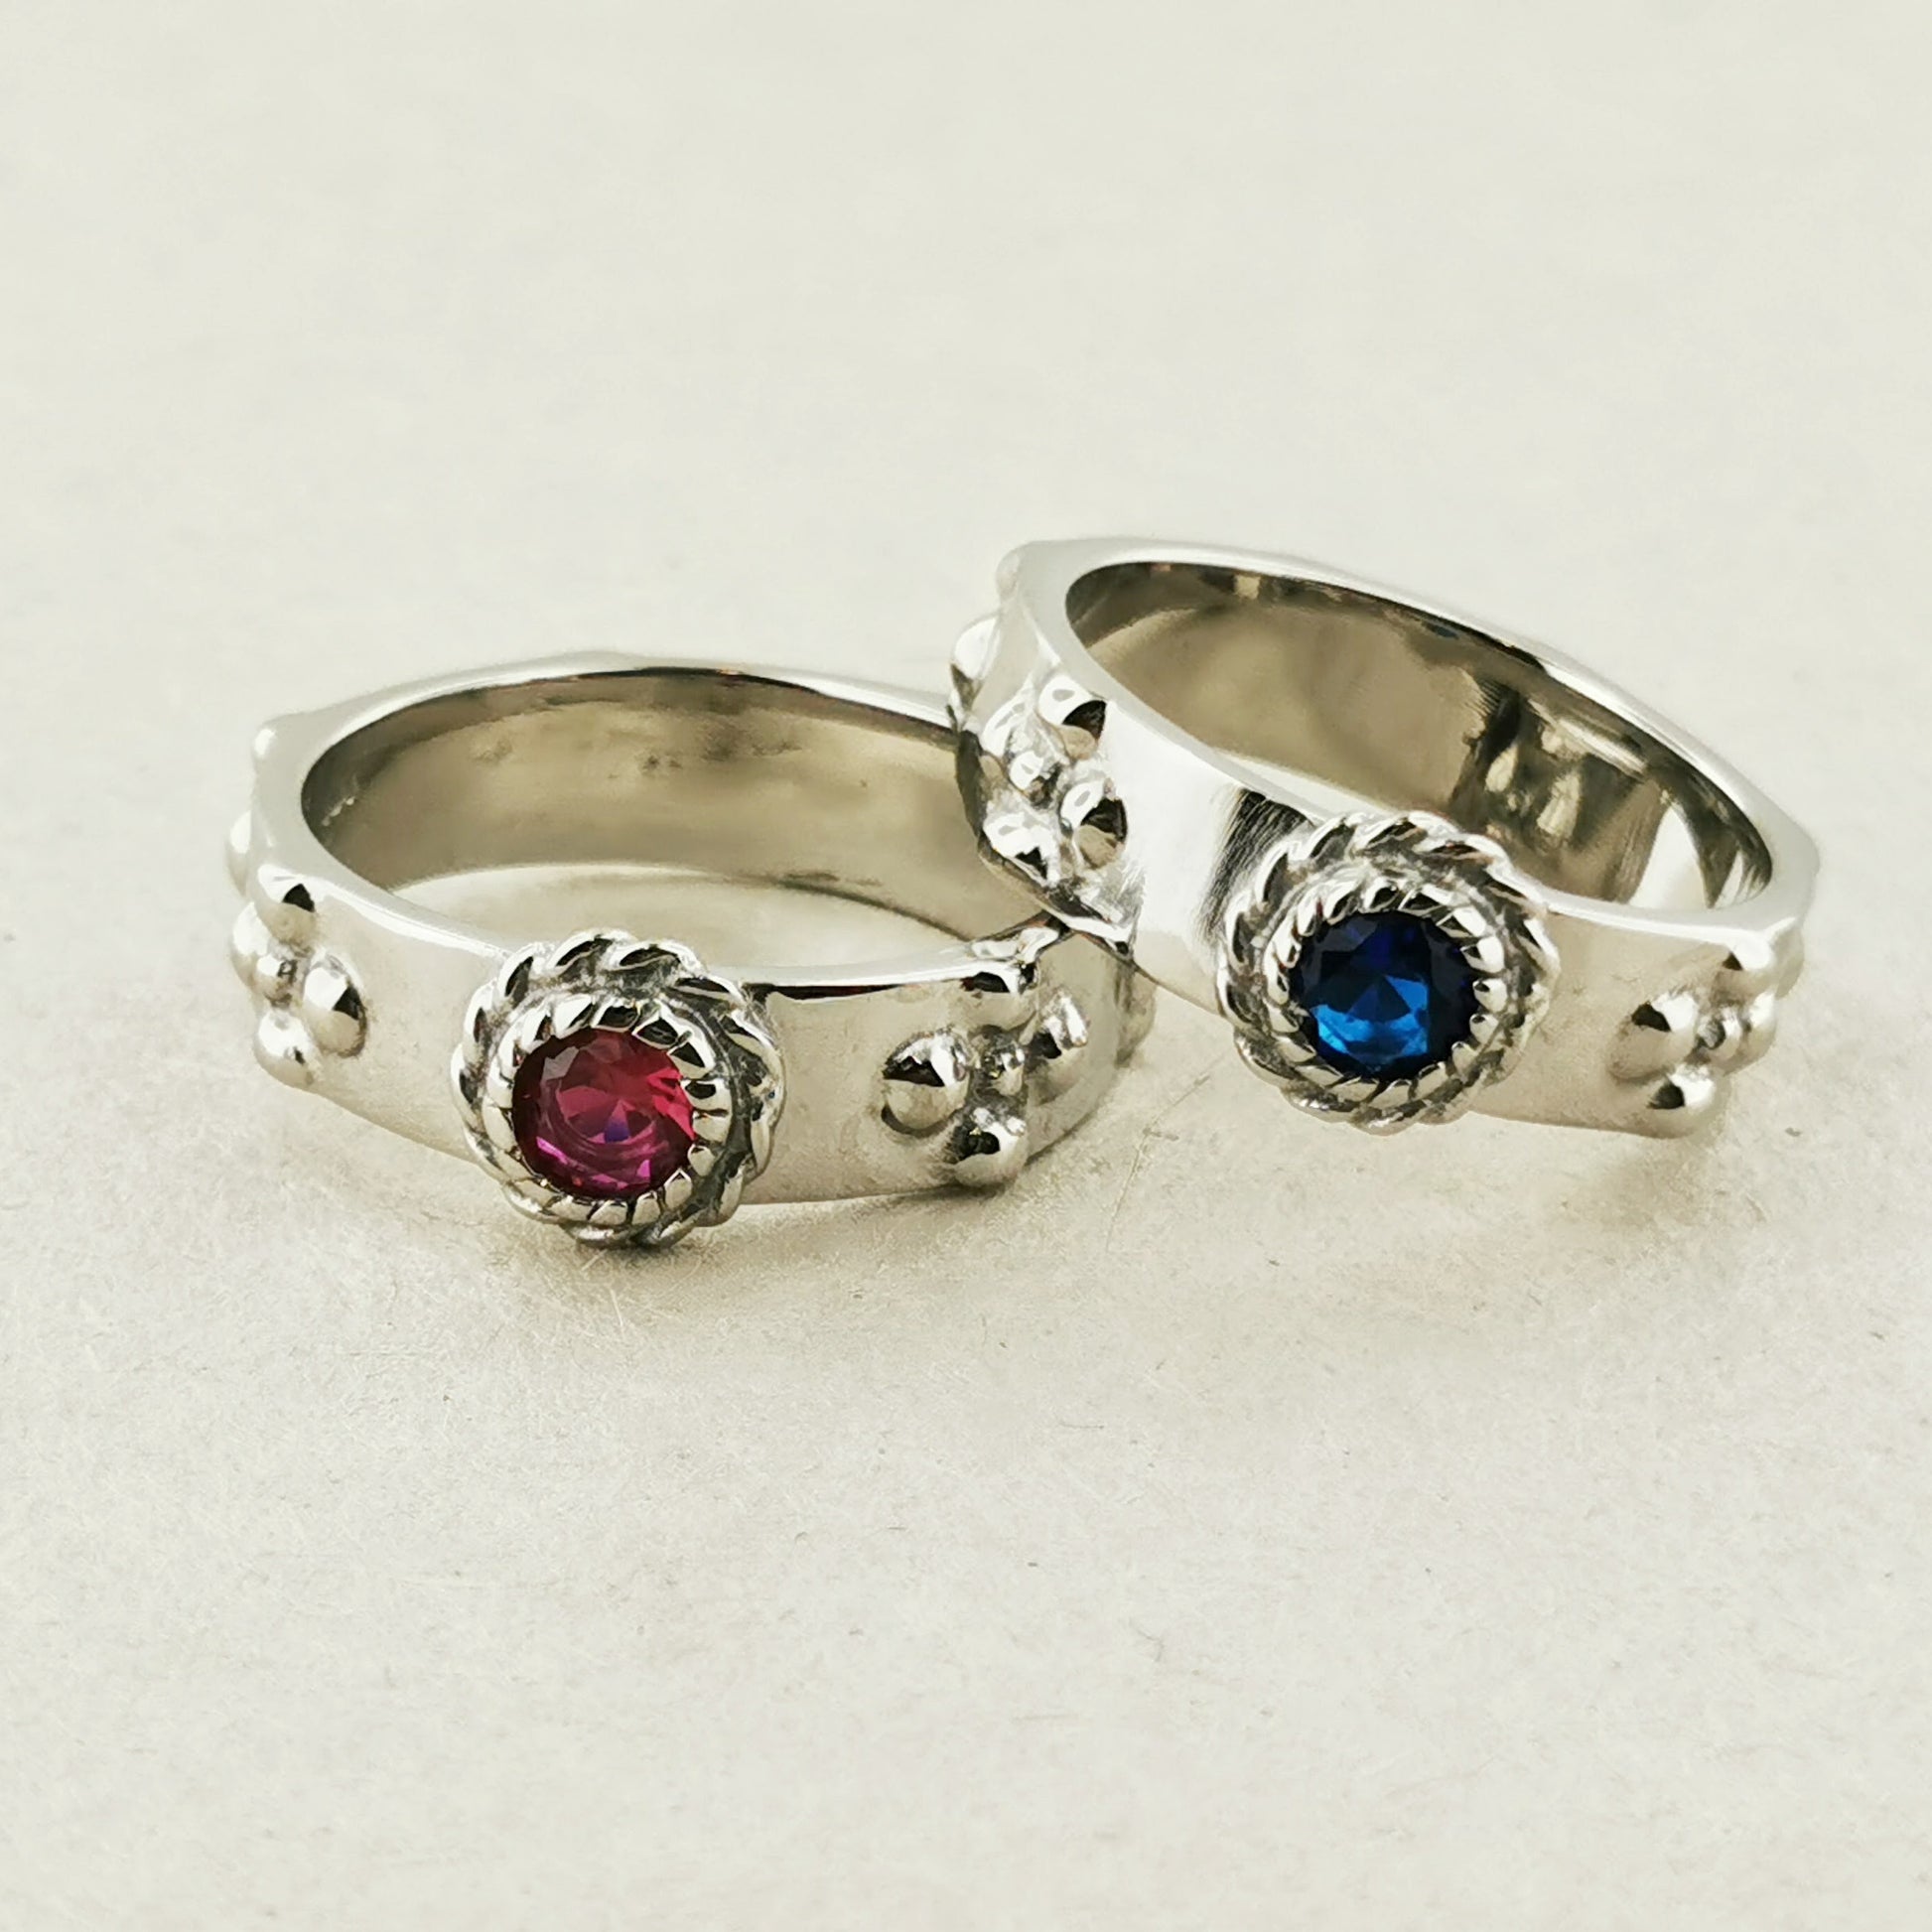 Howl and Sophie Ring Set in Stainless Steel with Faceted Imitation Gem